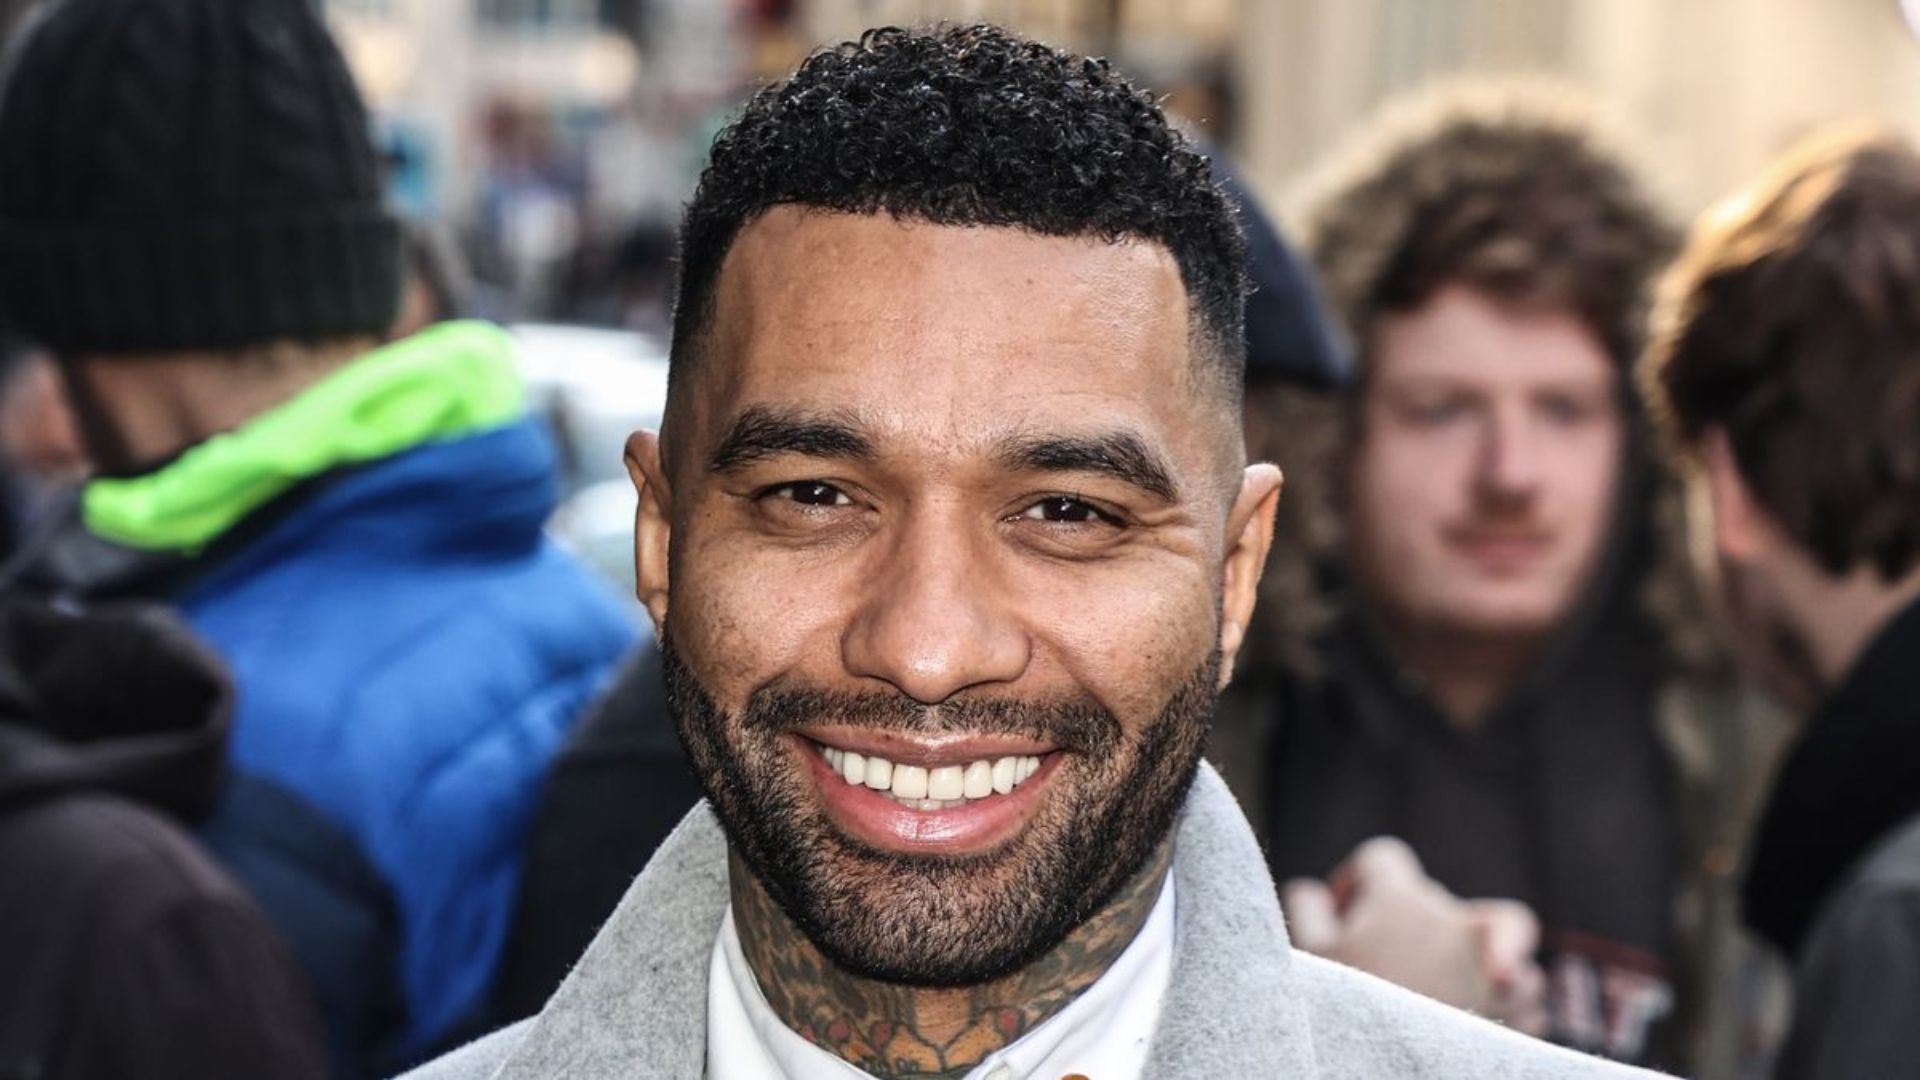 Jermaine Pennant lost more than £10m and piled up a £25k bar bill